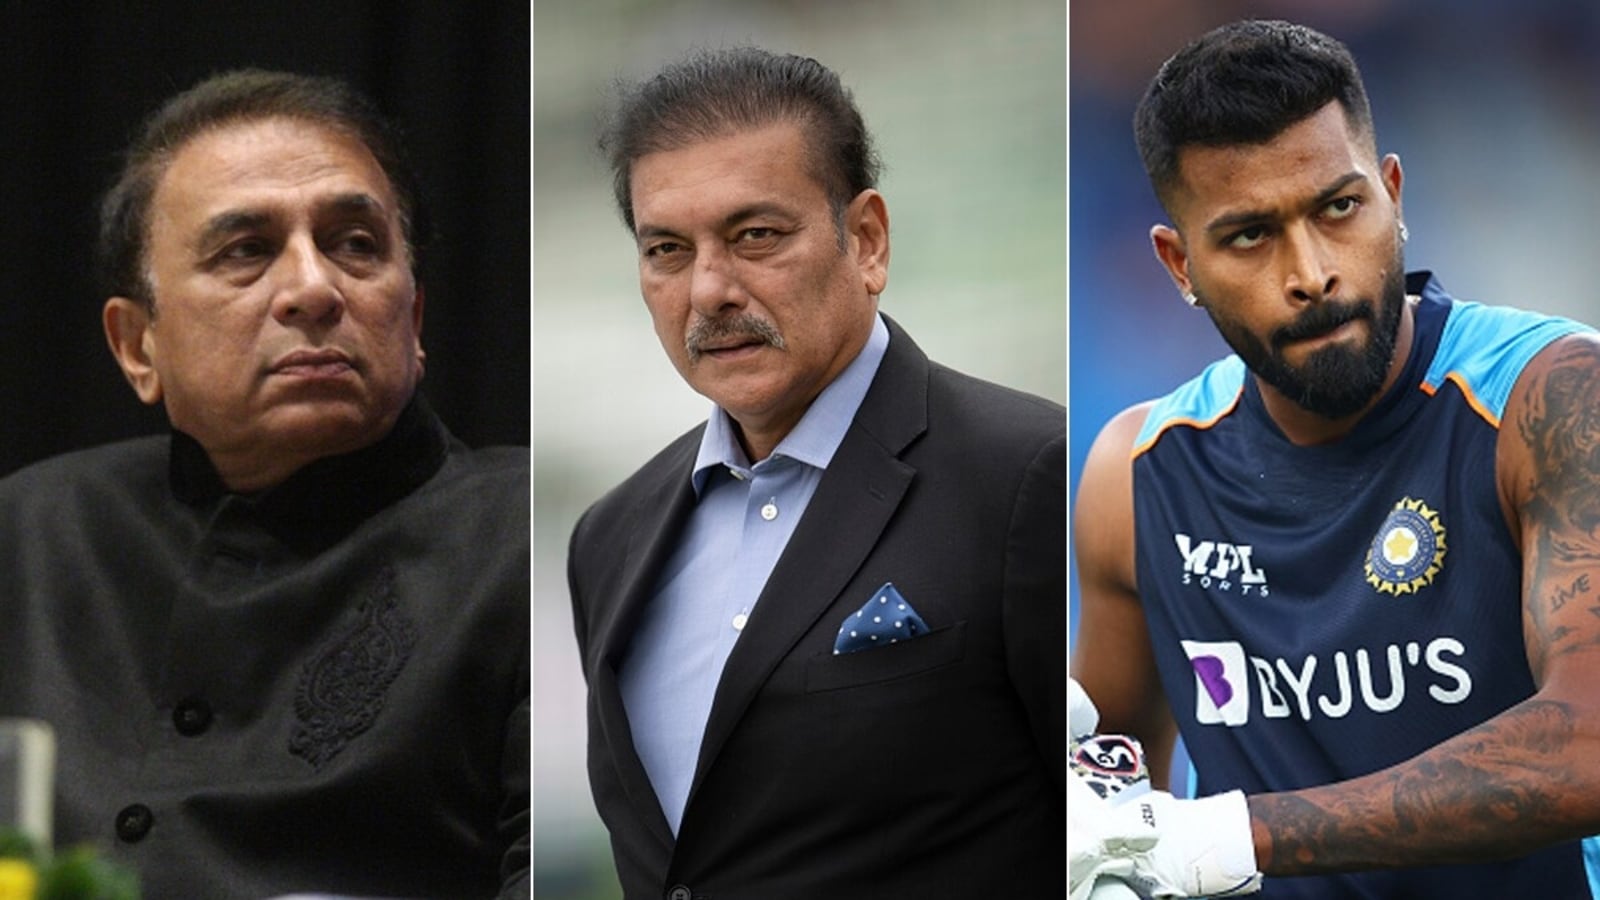 xyz-can-say-whatever-they-want-shastri-reacts-to-gavaskar-s-hardik-can-do-what-ravi-did-in-1985-remark